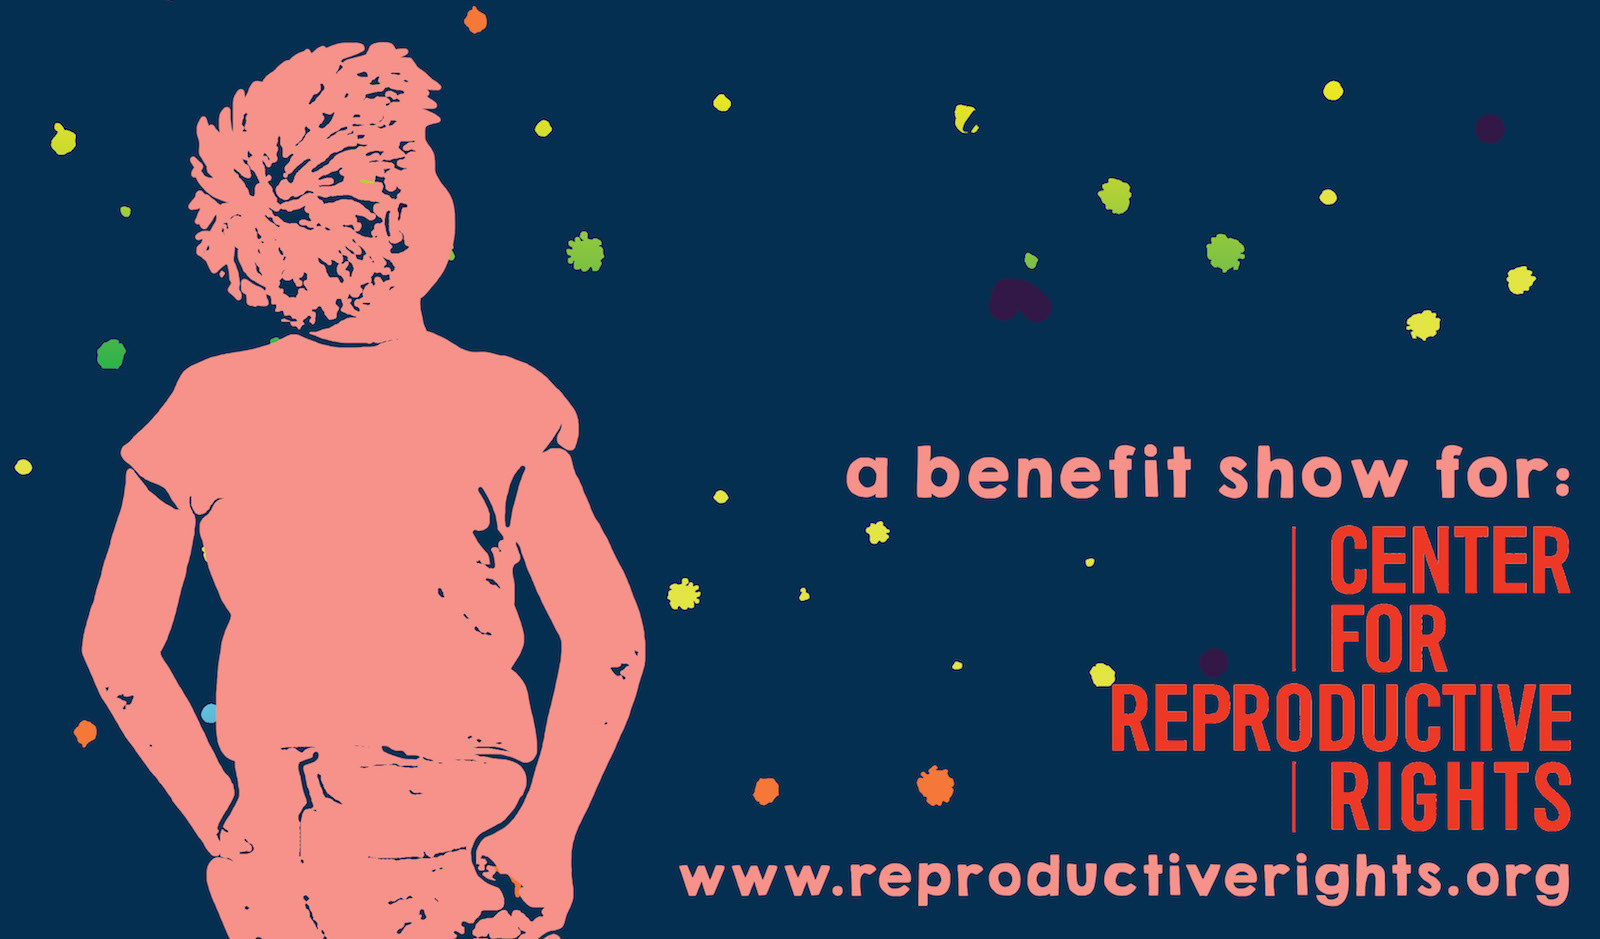 A benefit show for the Center for Reproductive Rights